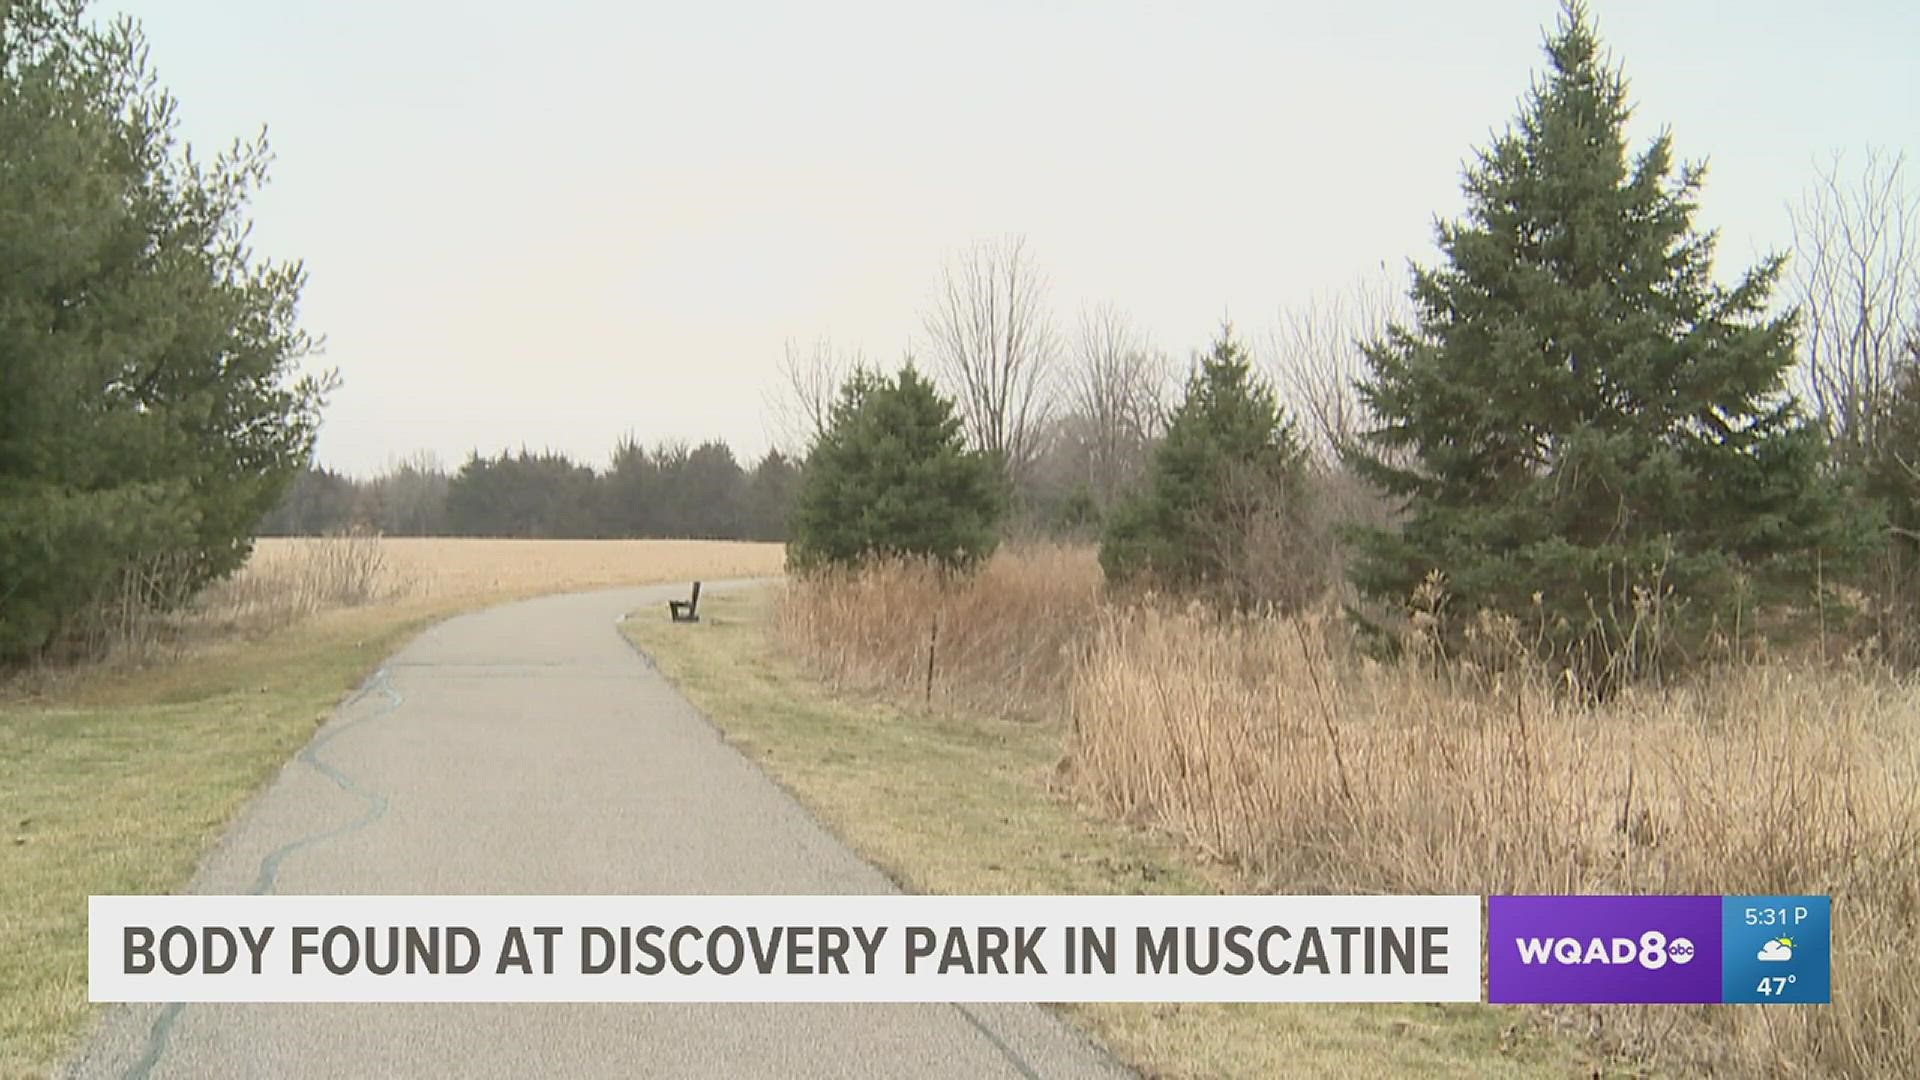 Friday morning trailgoers found squad cars and crime scene tape on their morning walk as police investigated a wooded area of the park when the body was found.